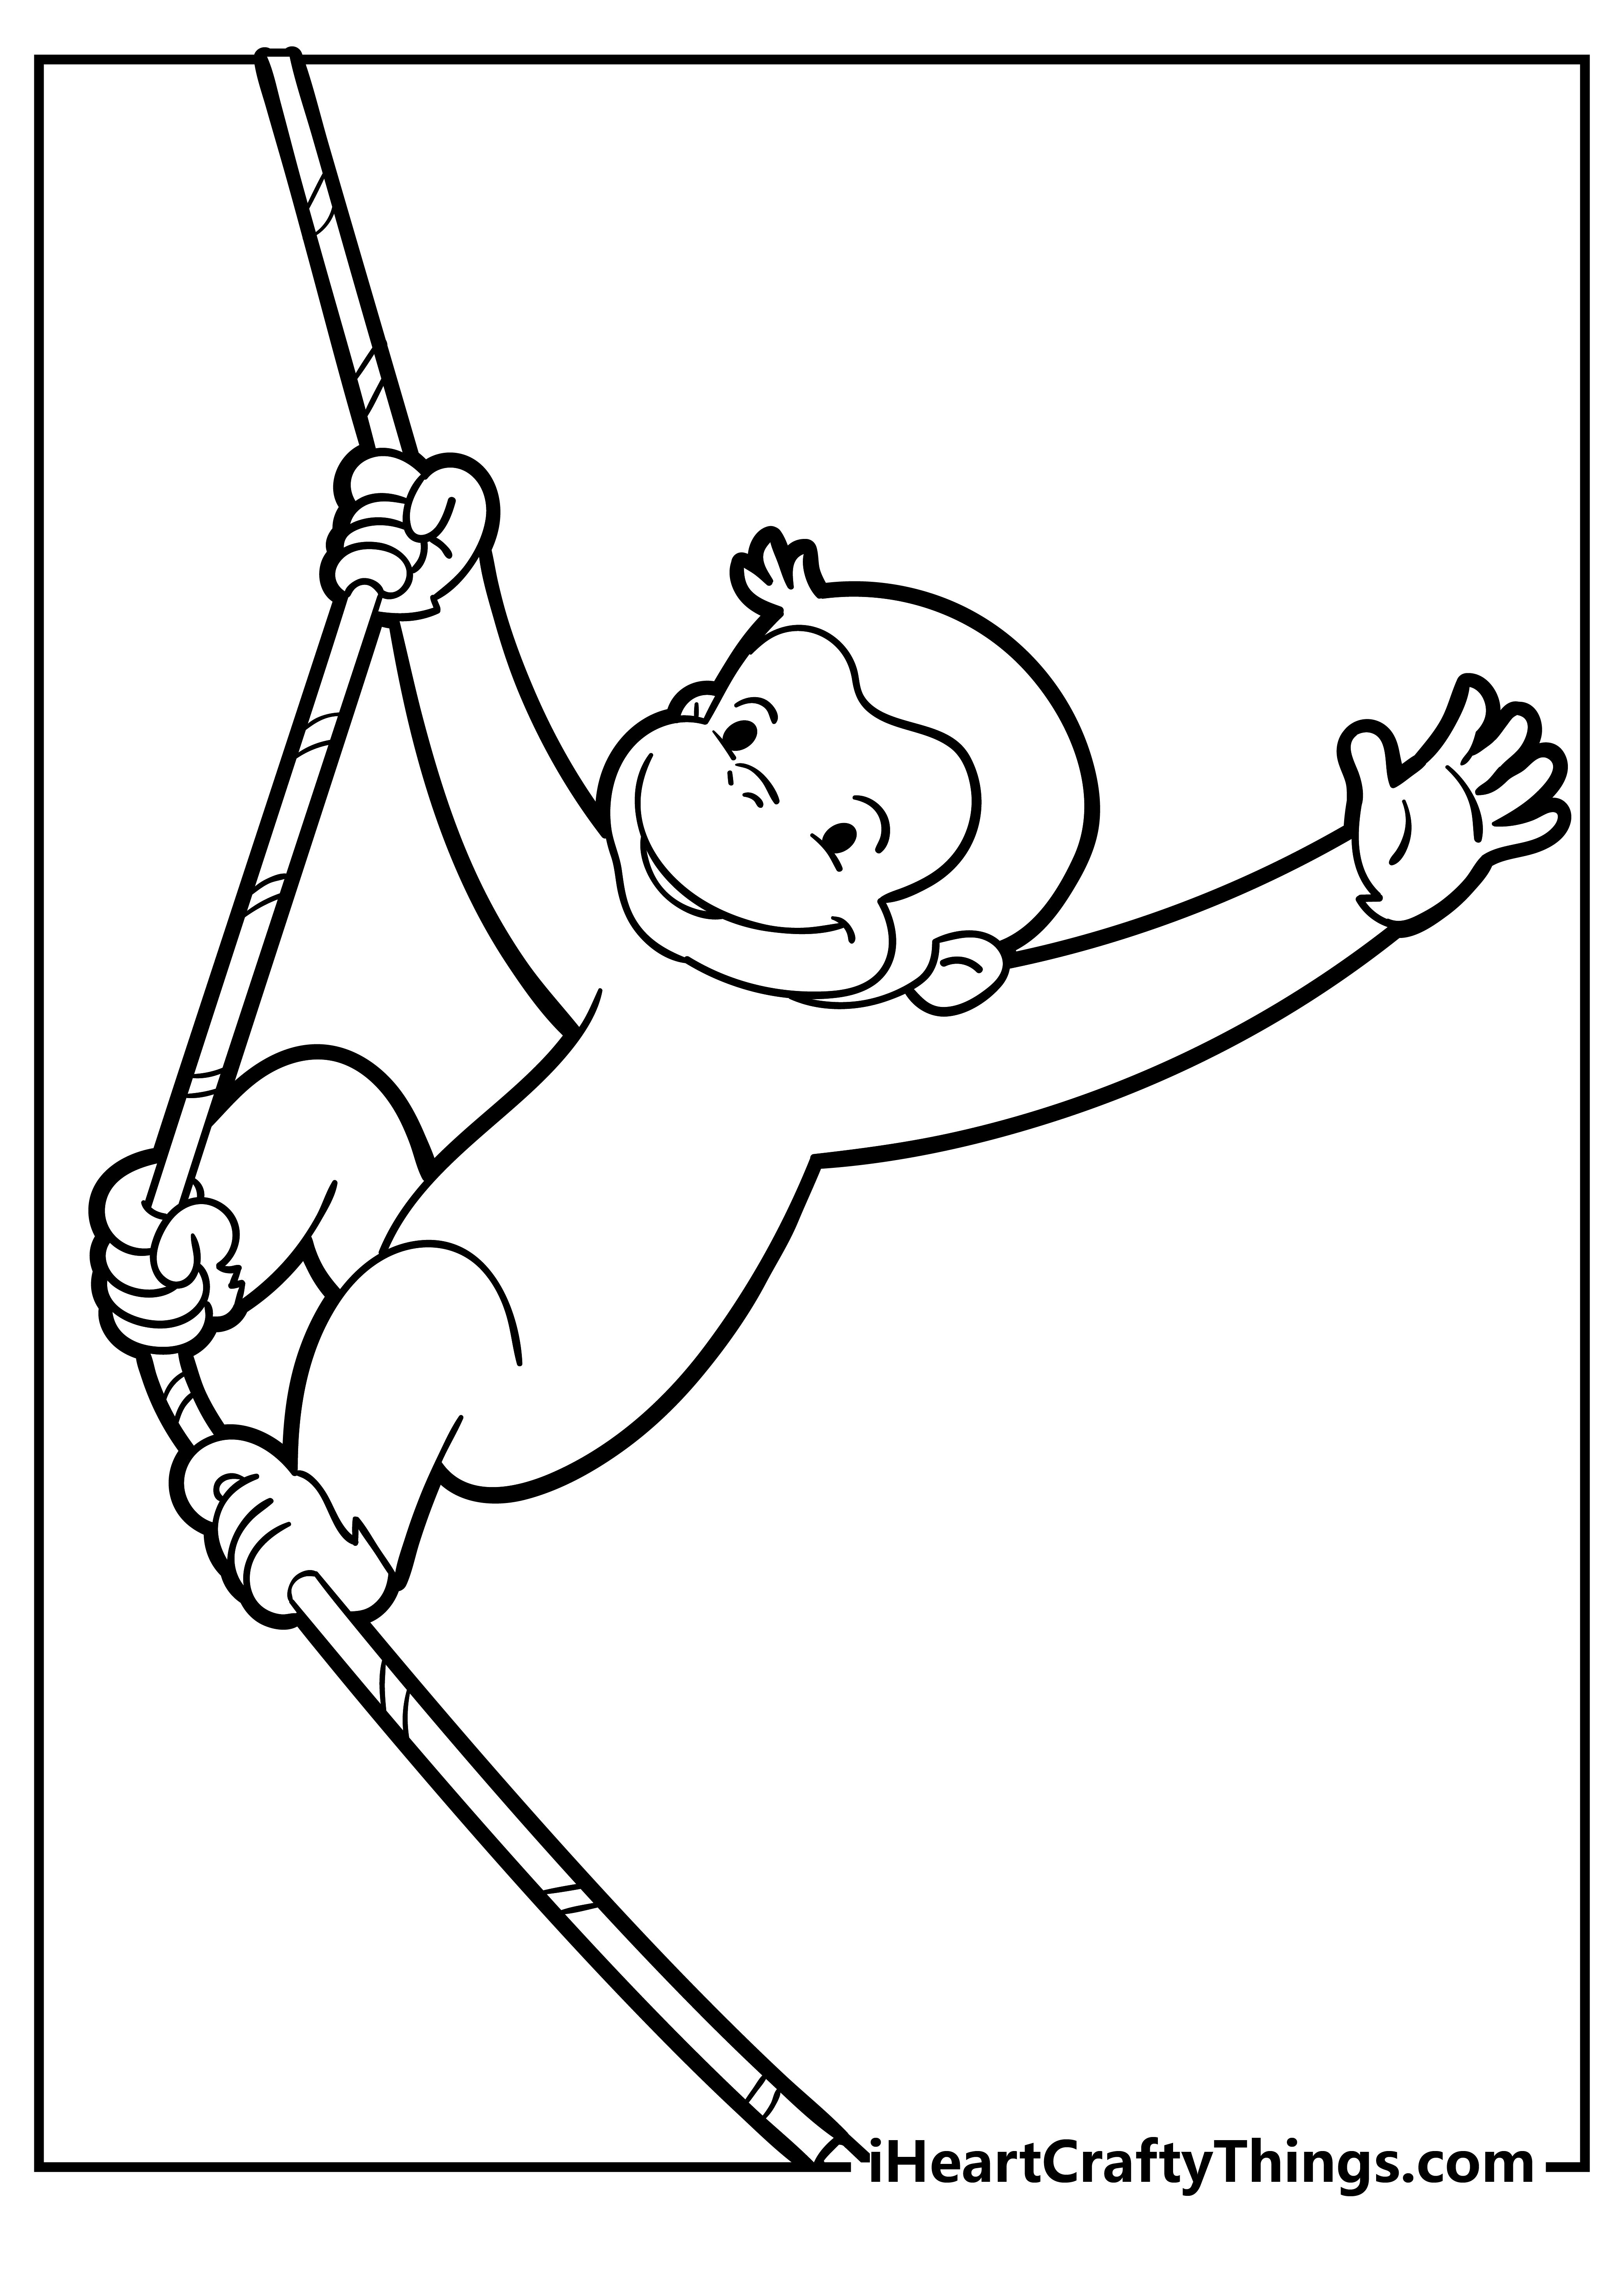 Curious George Coloring Sheet for children free download